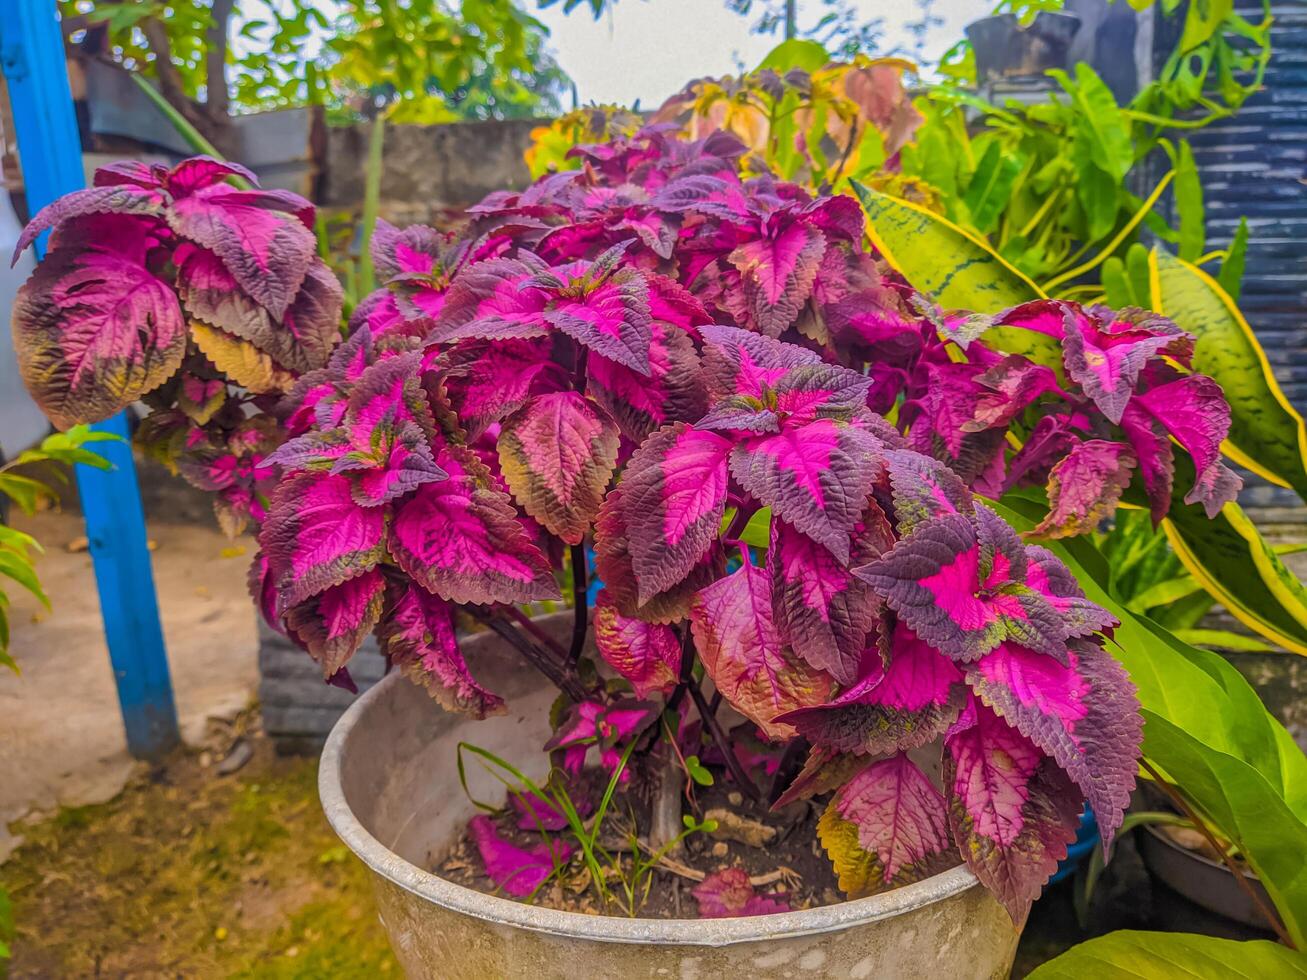 Coleus scutellarioides, commonly known as coleus, is a species of flowering plant in the family Lamiaceae. Beautiful flowers in the garden. photo